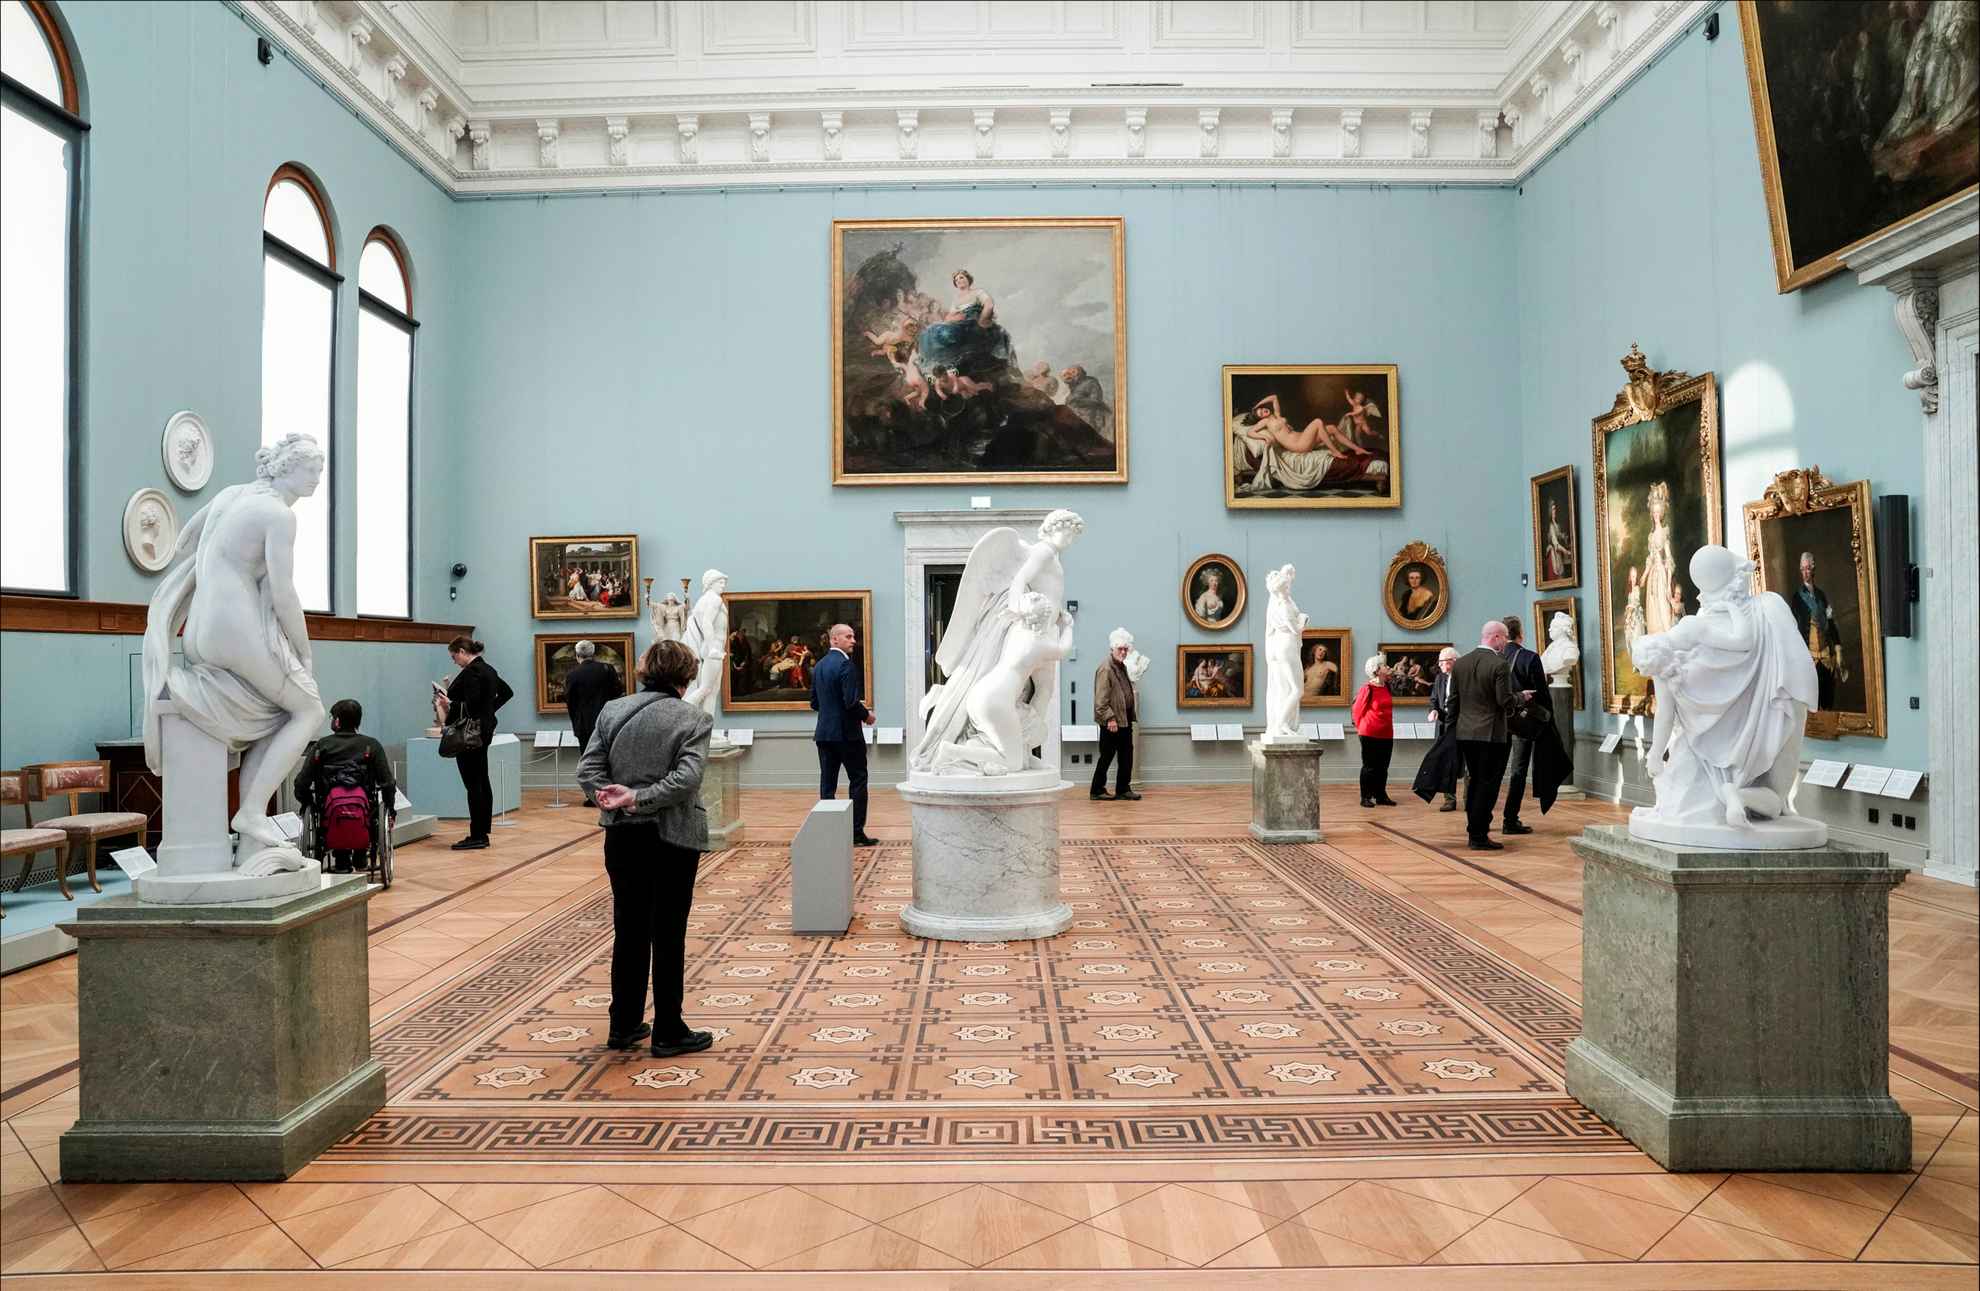 People are walking around in a large room with paintings and sculptures.